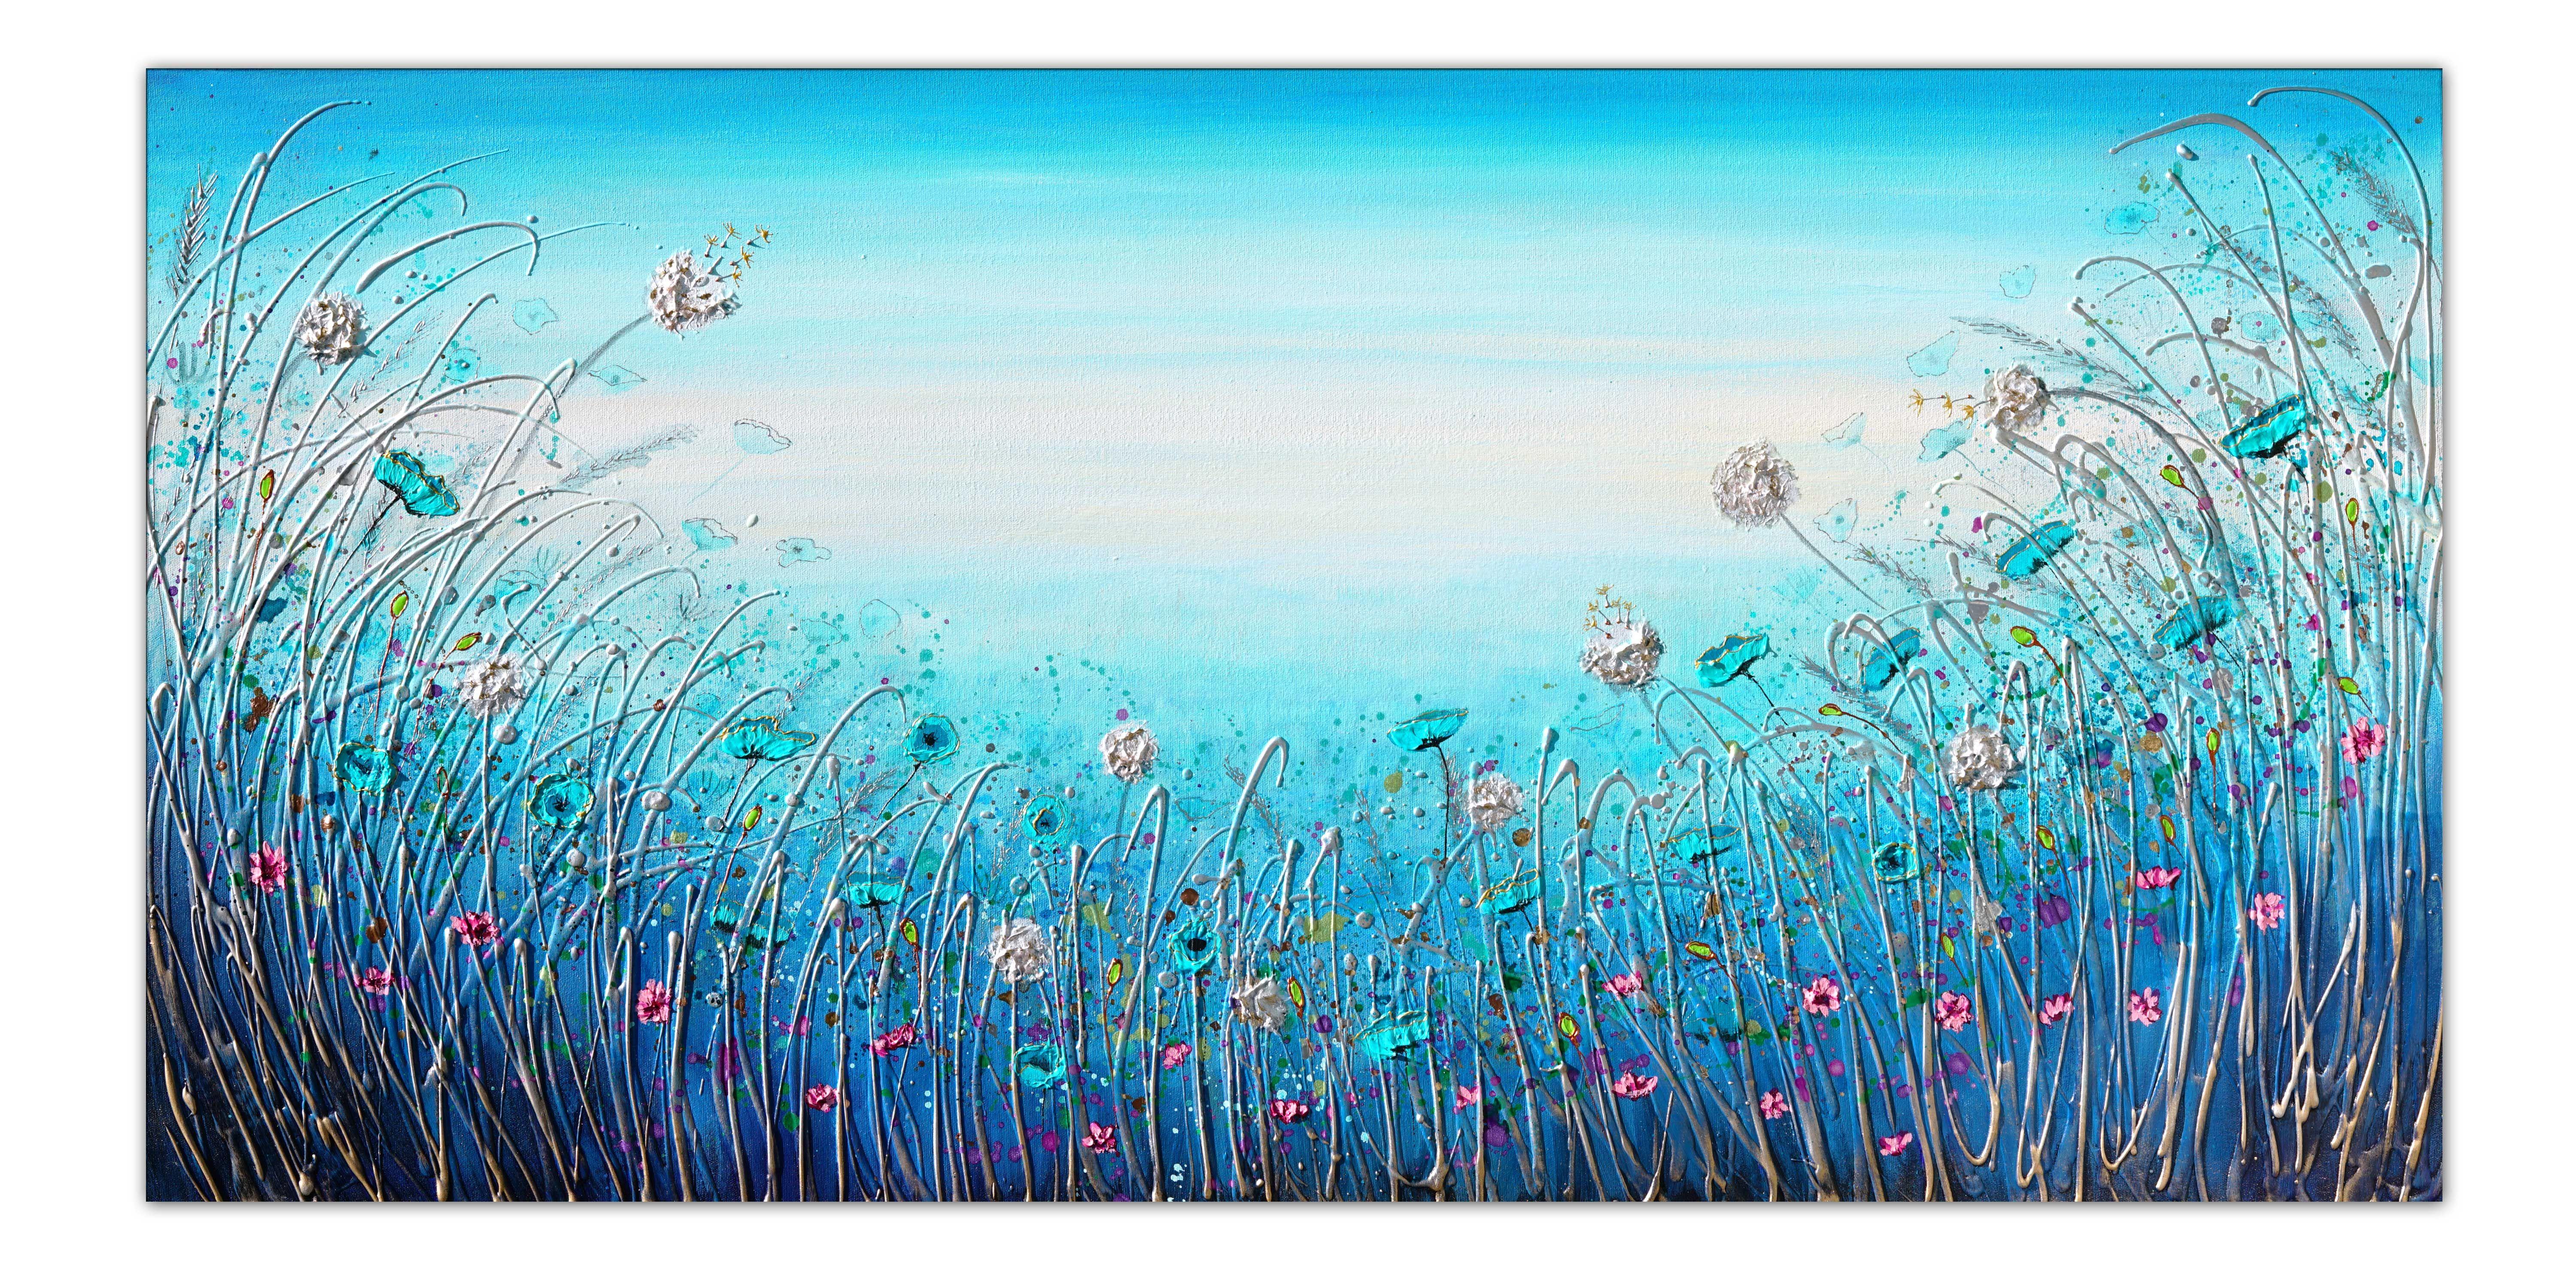 Original beautiful textured painting of flowers in grasses painted on canvas. Full of thick paint! Impasto artwork  100% Handmade     MEDIUM: High-quality professional acrylics on a deep edge canvas. Varnished. Ready to Hang     SIZE: 48x24x2 inches